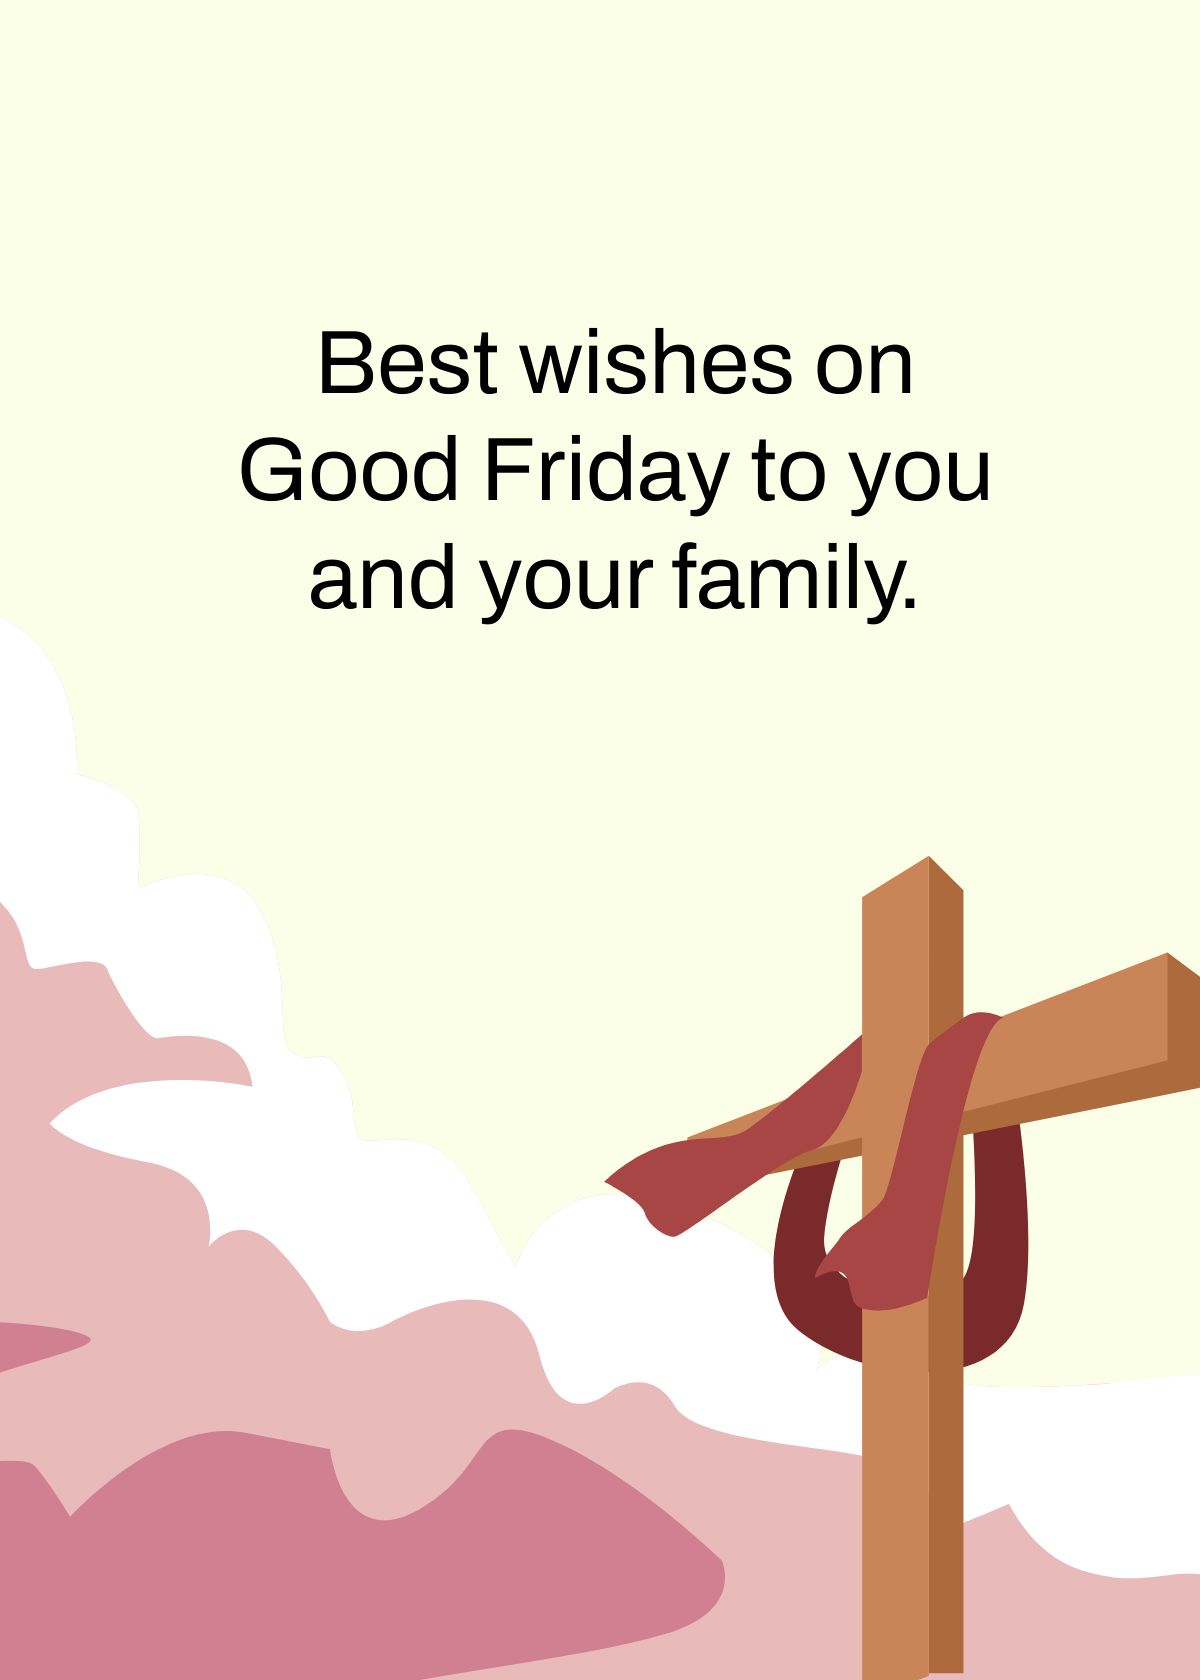 Good Friday Best Wishes in Google Docs, EPS, Illustrator, JPG, Word, PSD,  PNG, SVG - Download | Template.net